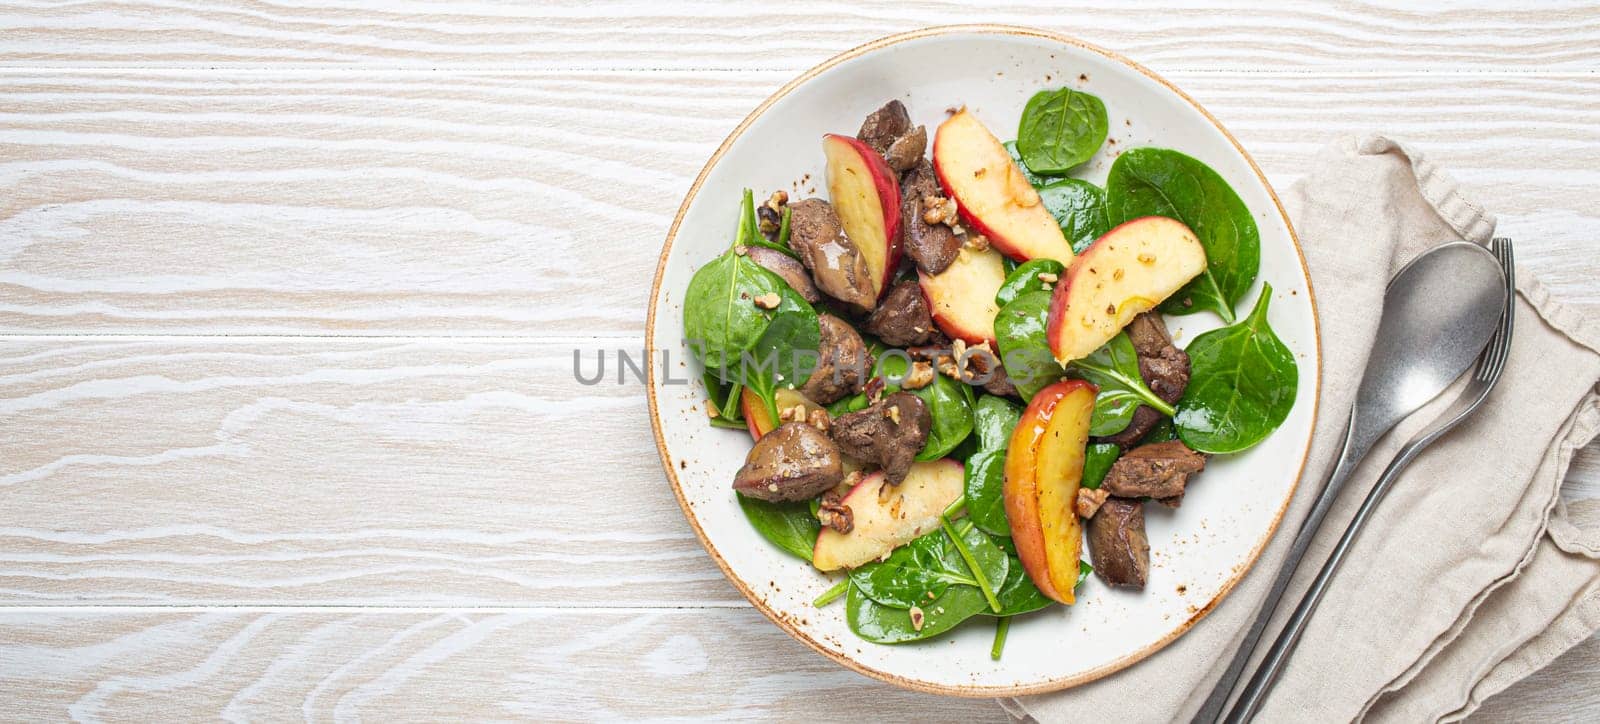 Healthy Salad with Iron Rich Ingredients Chicken Liver, Apples, Fresh Spinach and Walnuts on White Ceramic Plate, White Wooden Background From Above Space For Text.